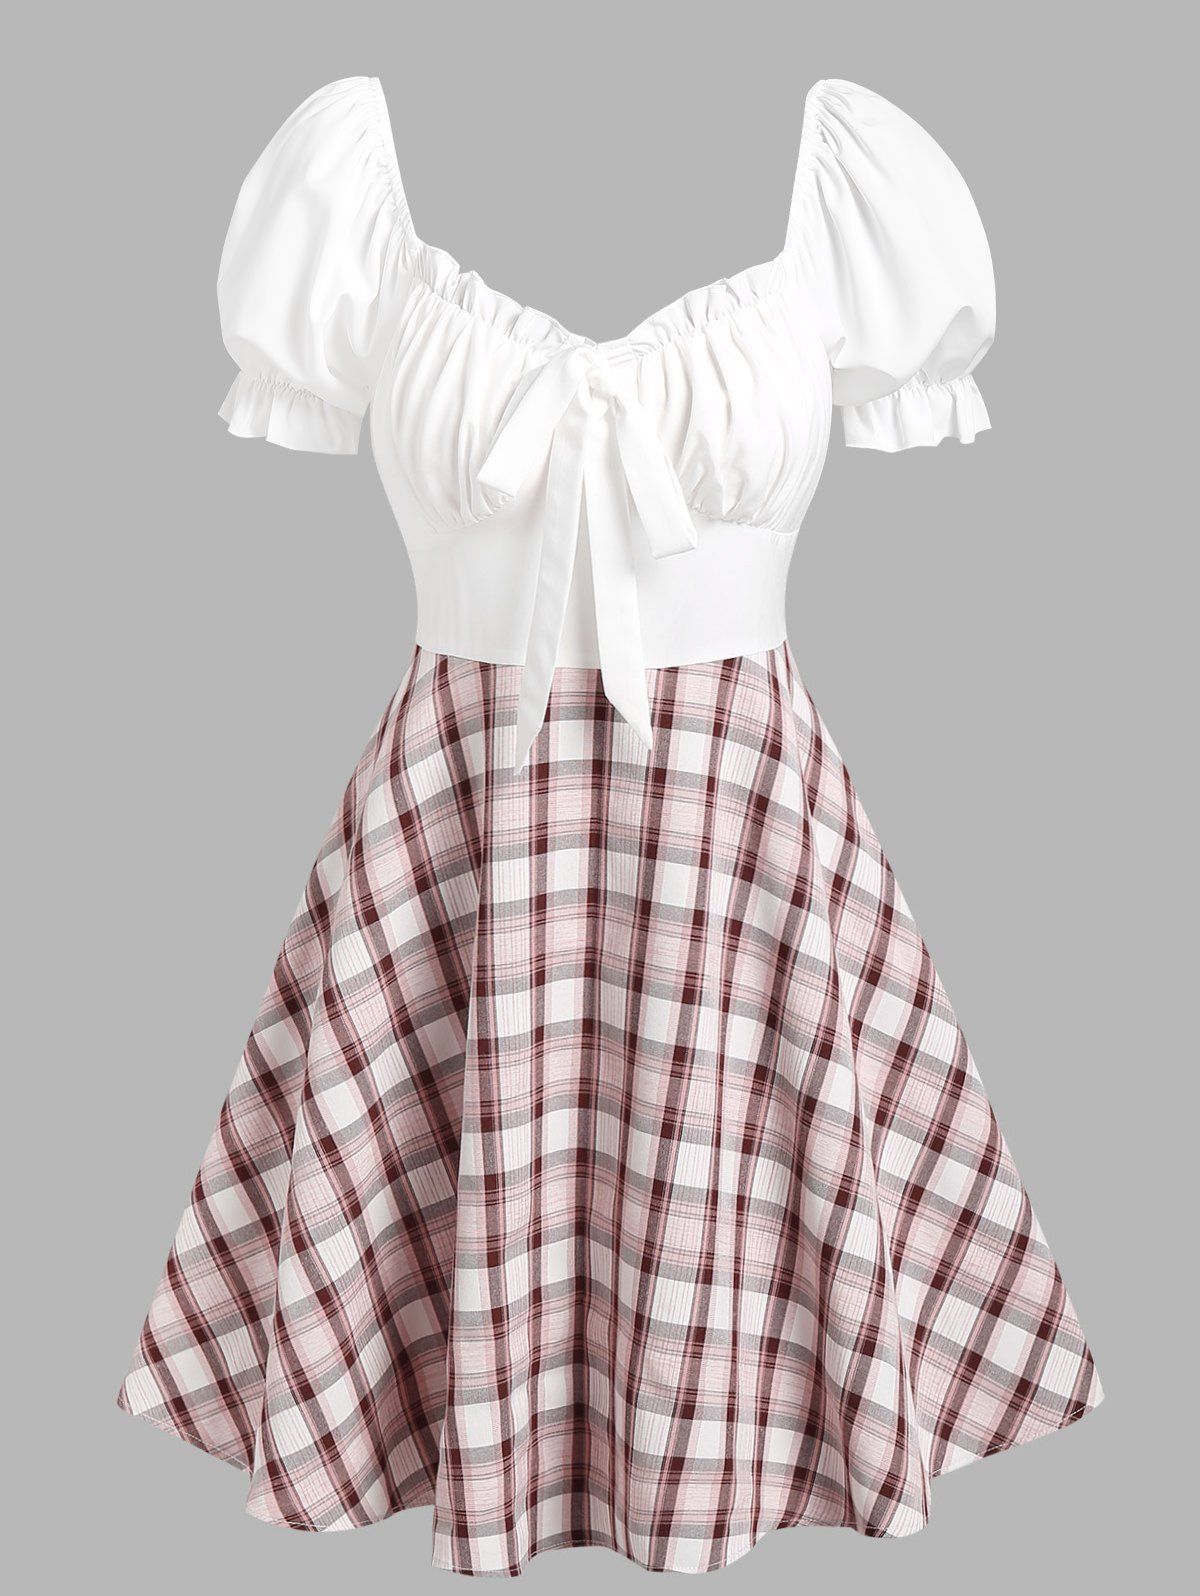 Plaid Checked Contrast Puff Sleeve Ruched Bowknot A Line Milkmaid Dress - multicolor L